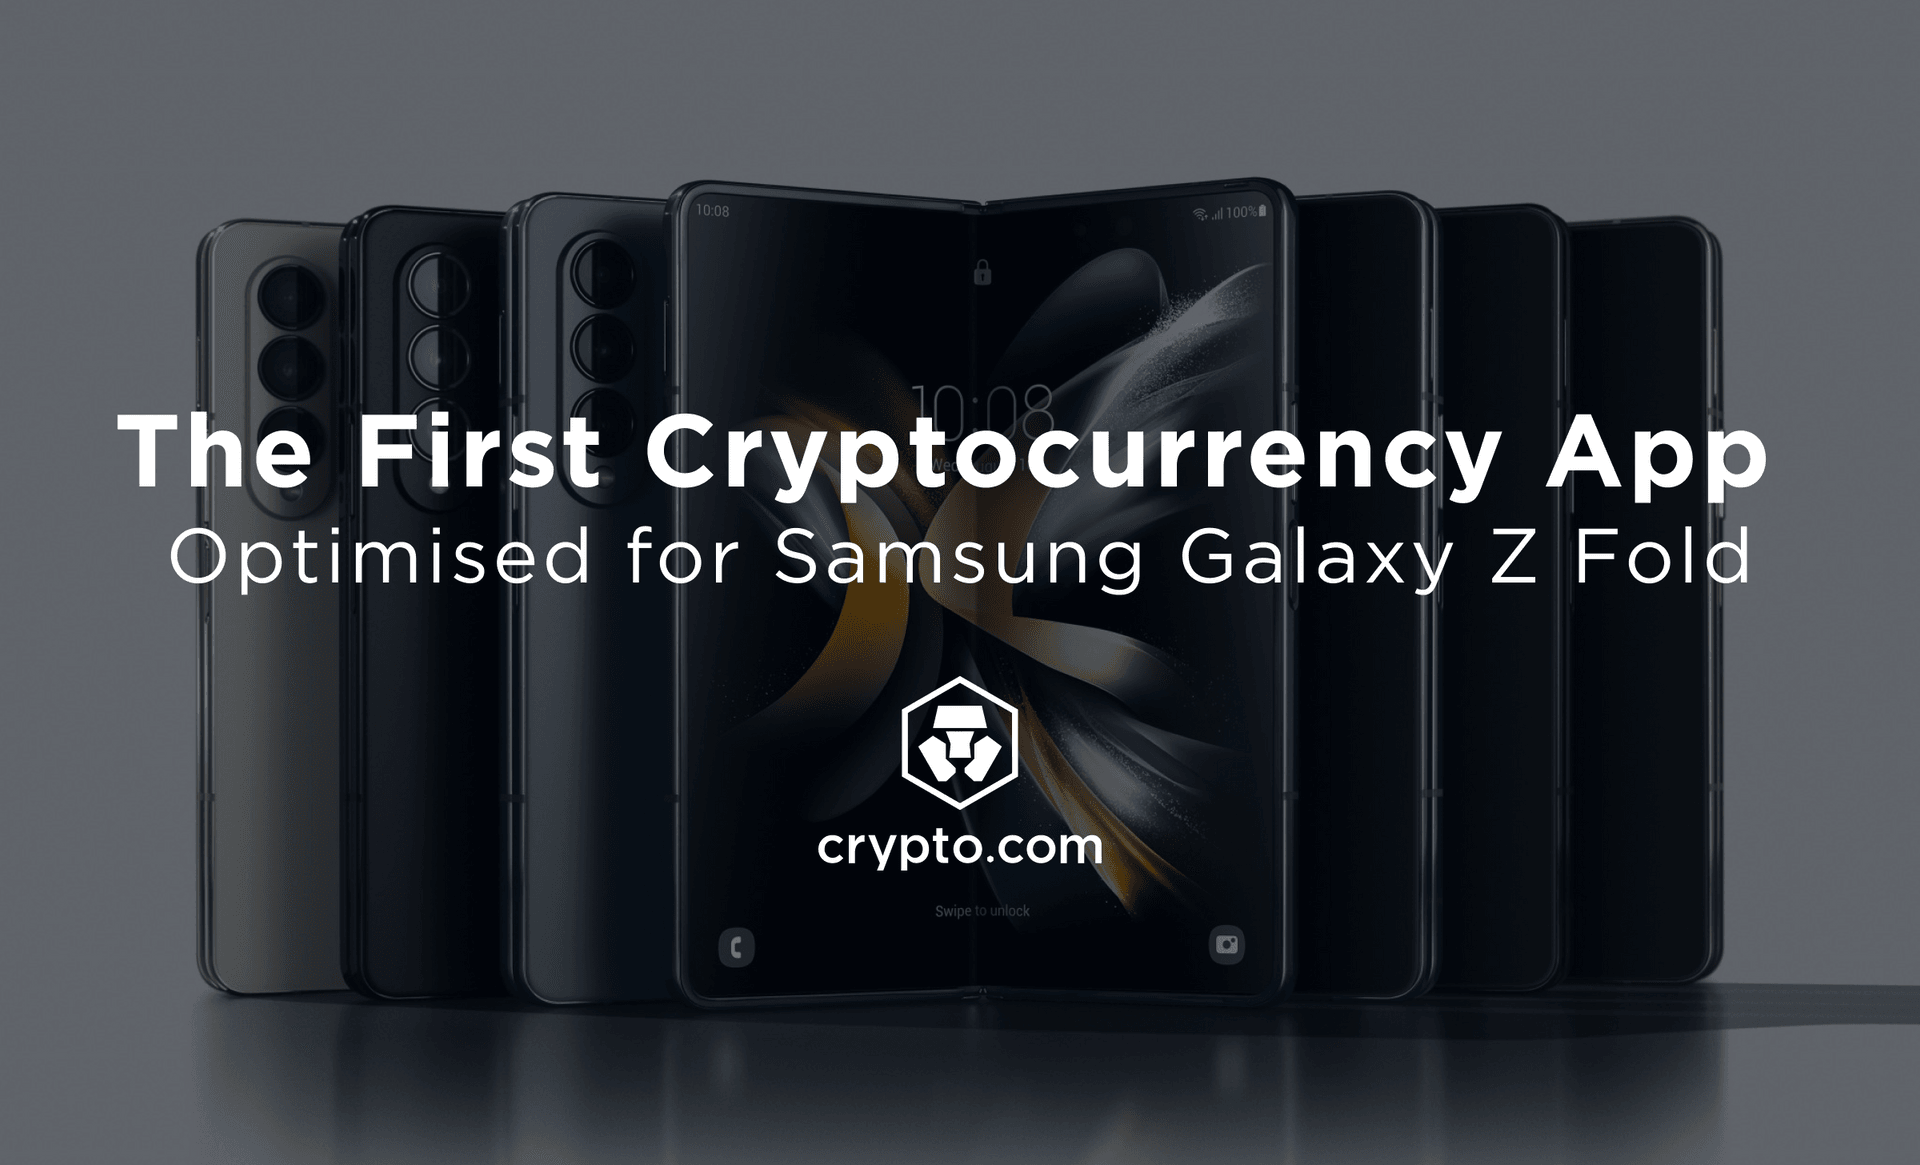 The First Cryptocurrency App Optimised For Samsung Galaxy Z Fold